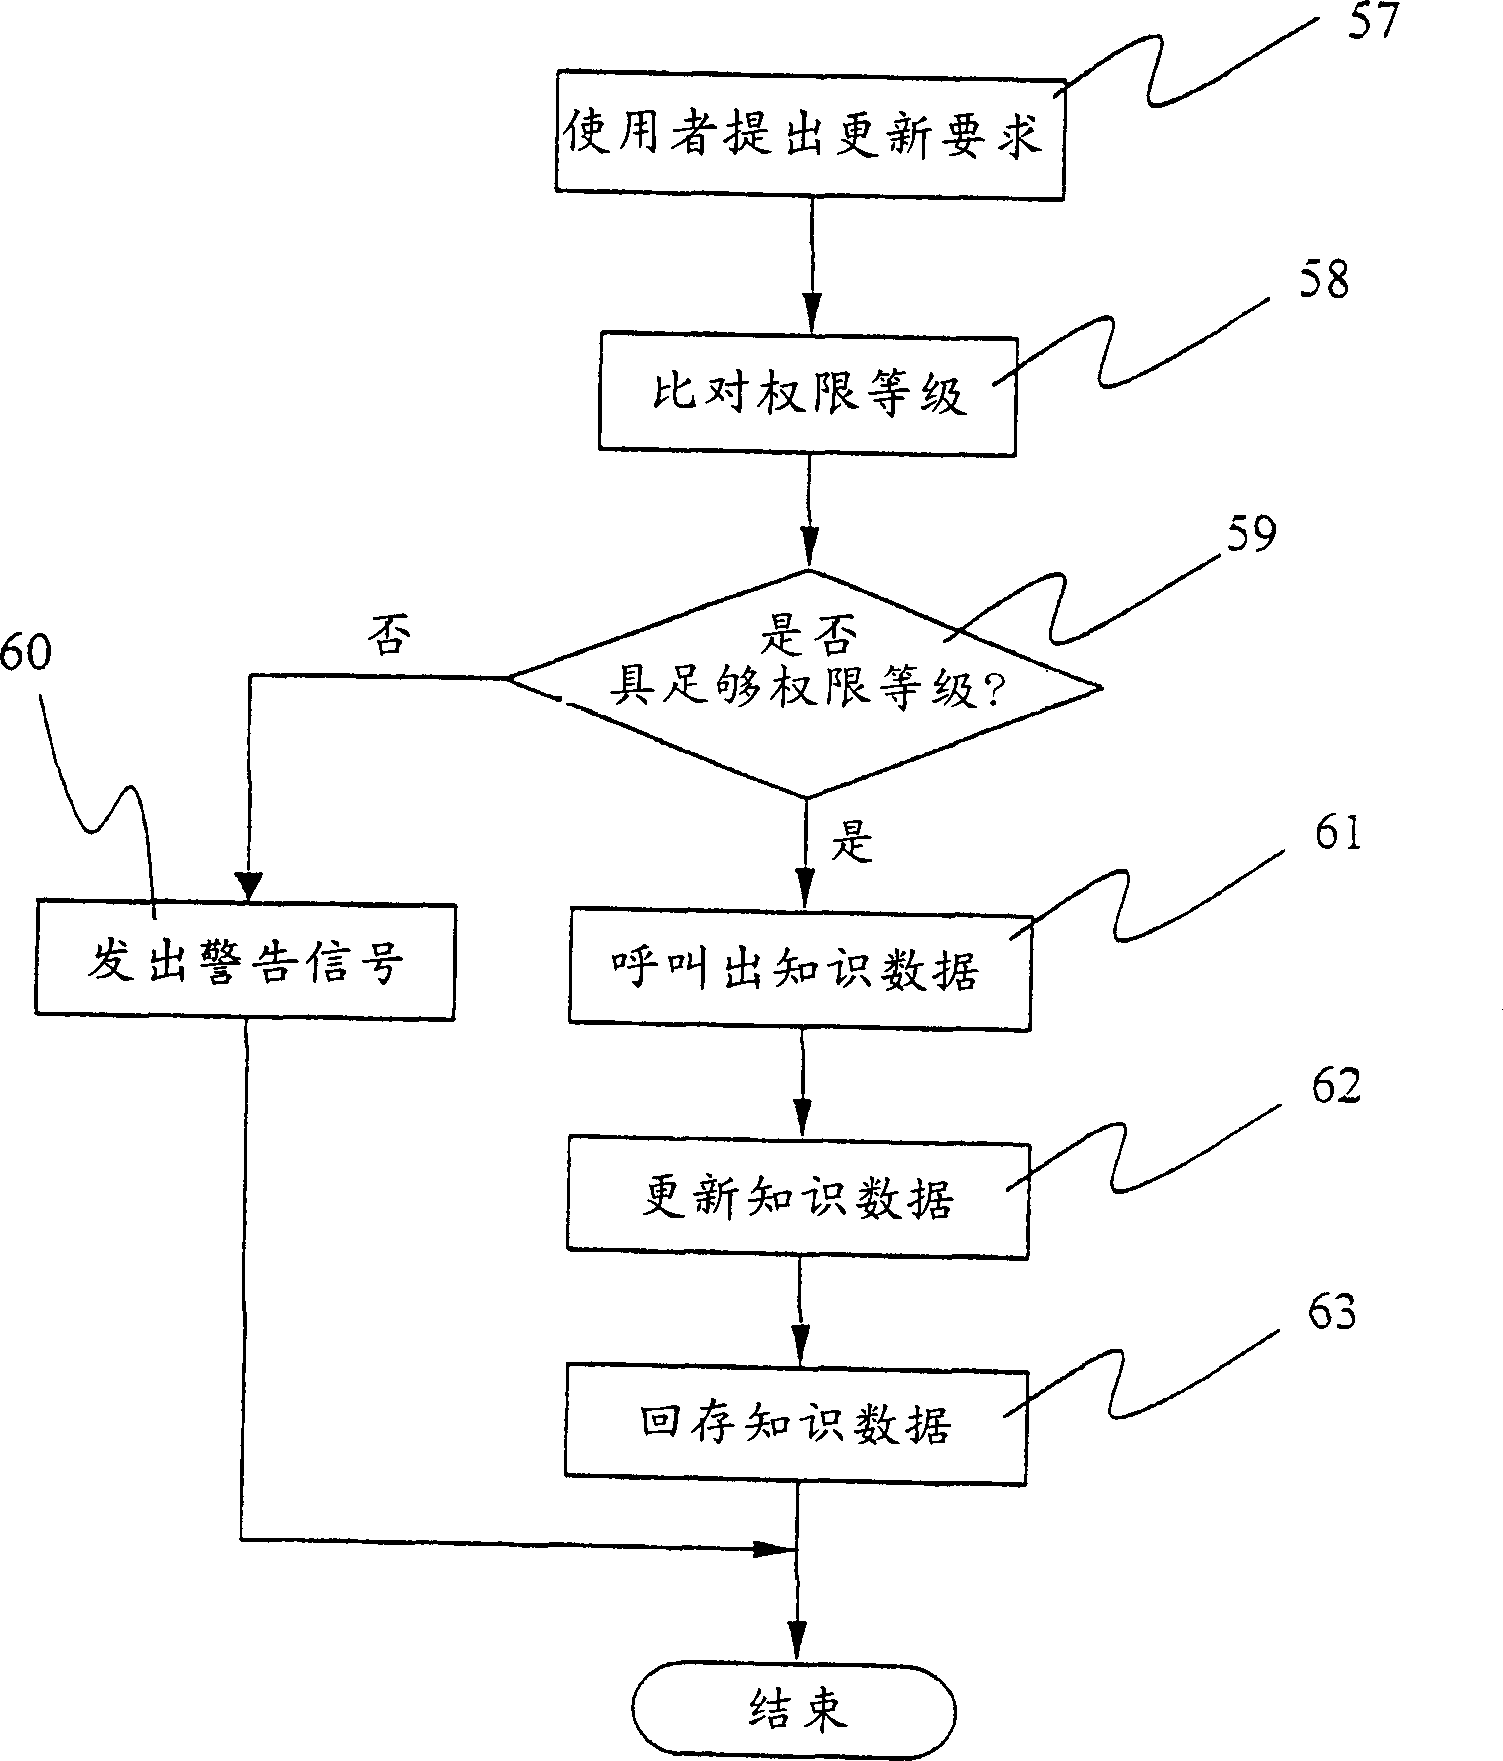 Virtual library management system capable of storing data into specific zone and its method